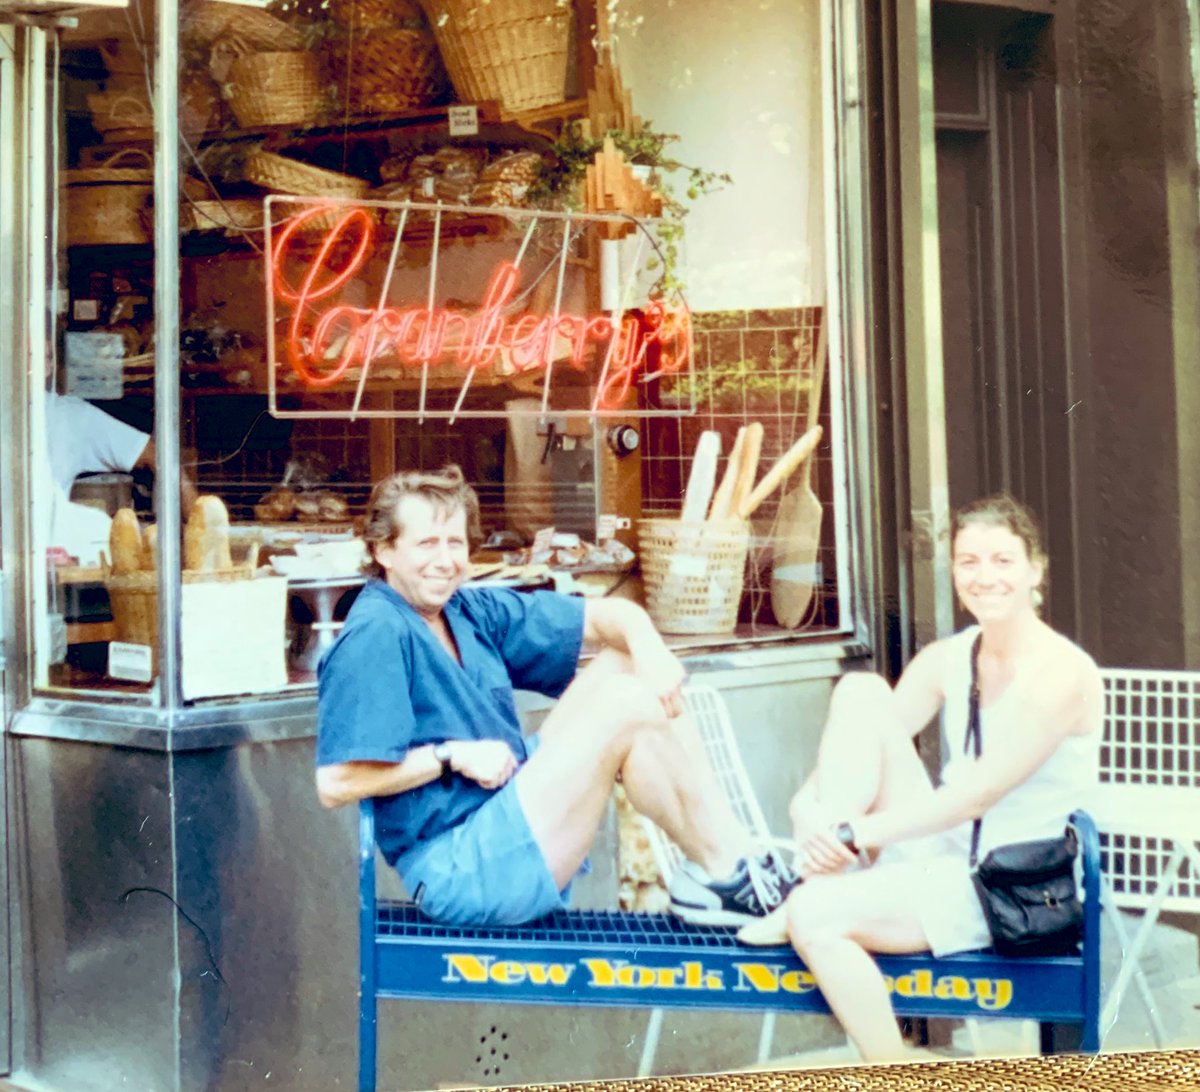 Not only did the store serve our Brooklyn Heights community, but it also brought my parents together.My dad liked my mom and “interviewed her for a job at the bakery” at the River Cafe, a four-star restaurant below the BK Bridge.